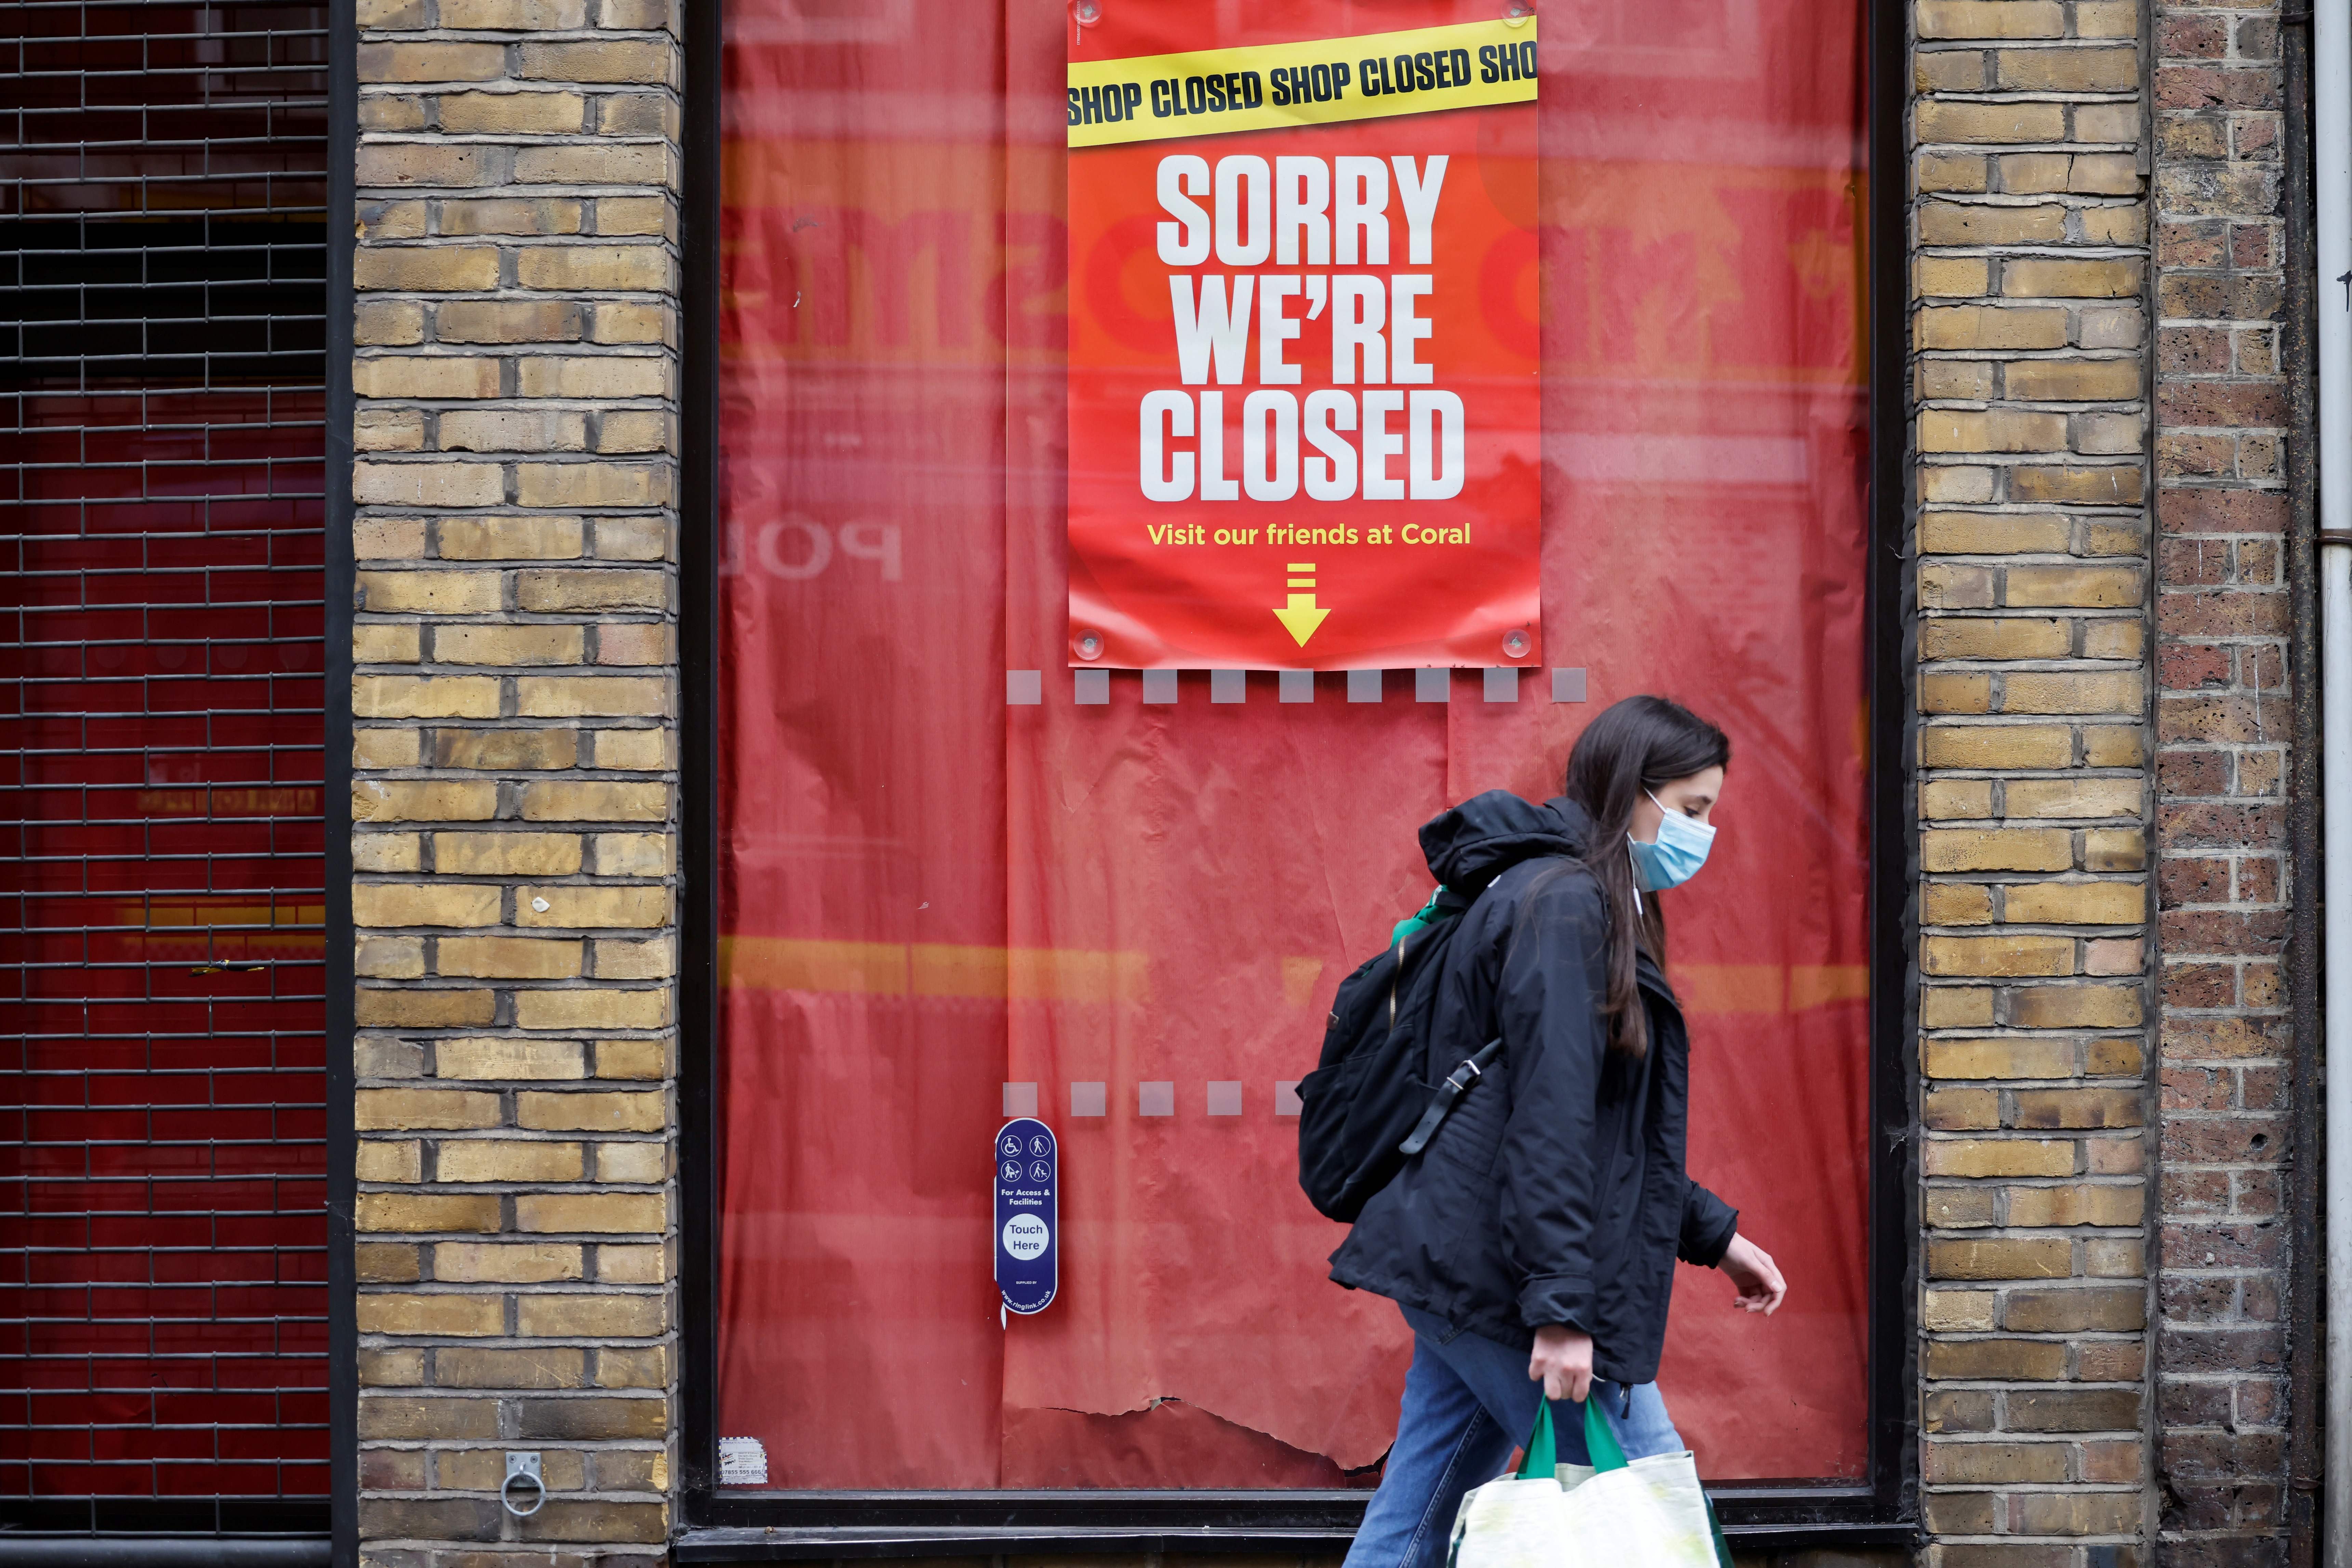 A pedestrian wearing a face mask as a precautionary measure against COVID-19, walks past a closed-down shop in the City of London in January 2021